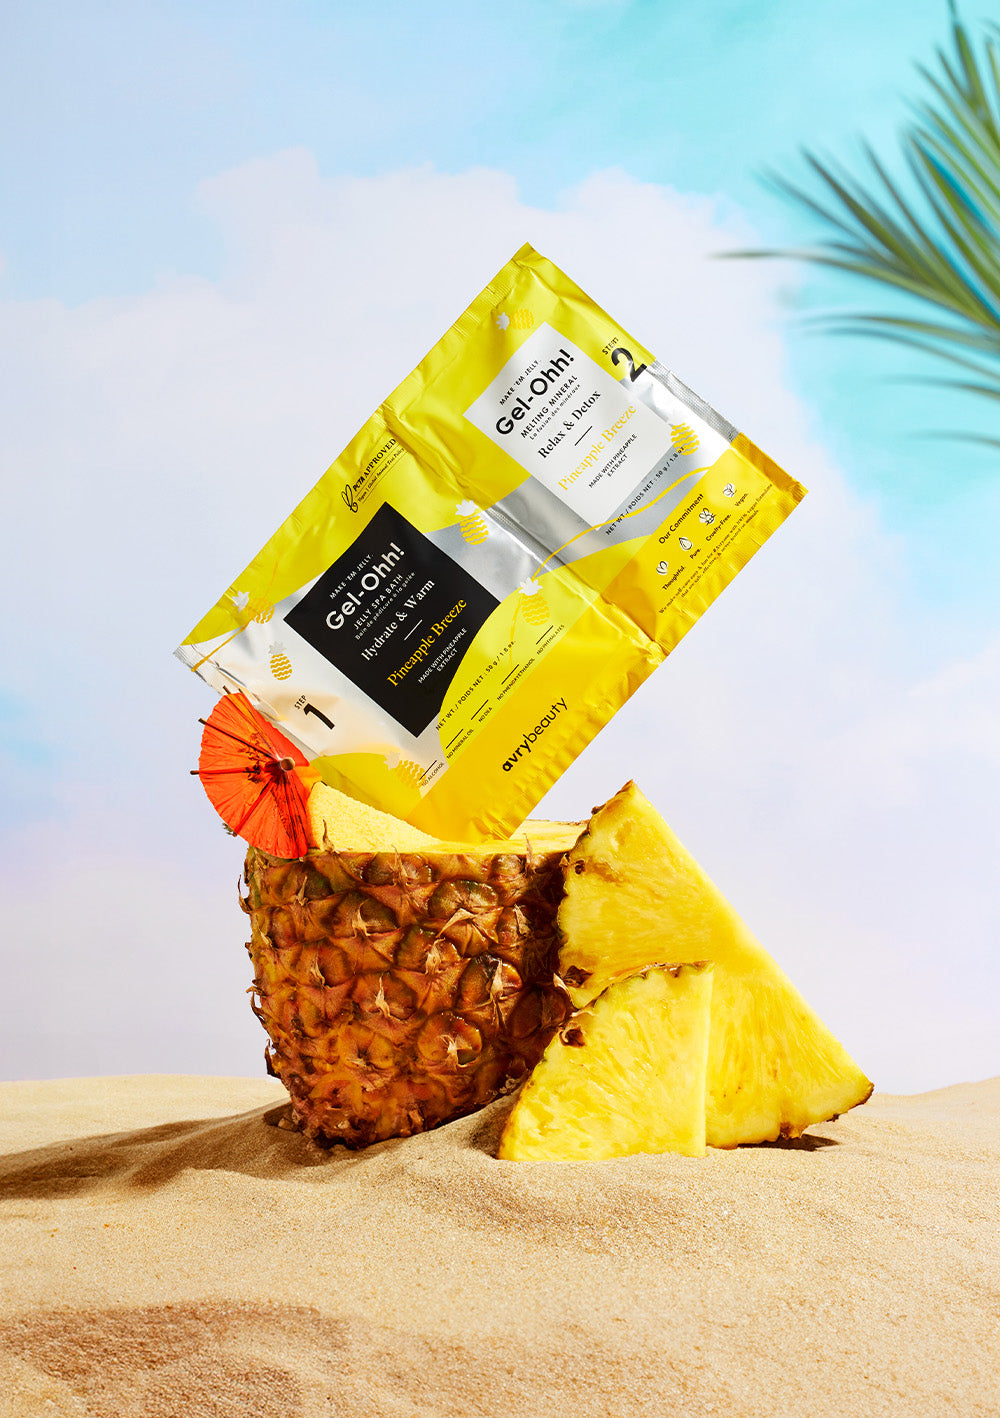 Pineapple Breeze Gel-Ohh! in a real pineapple on a beach